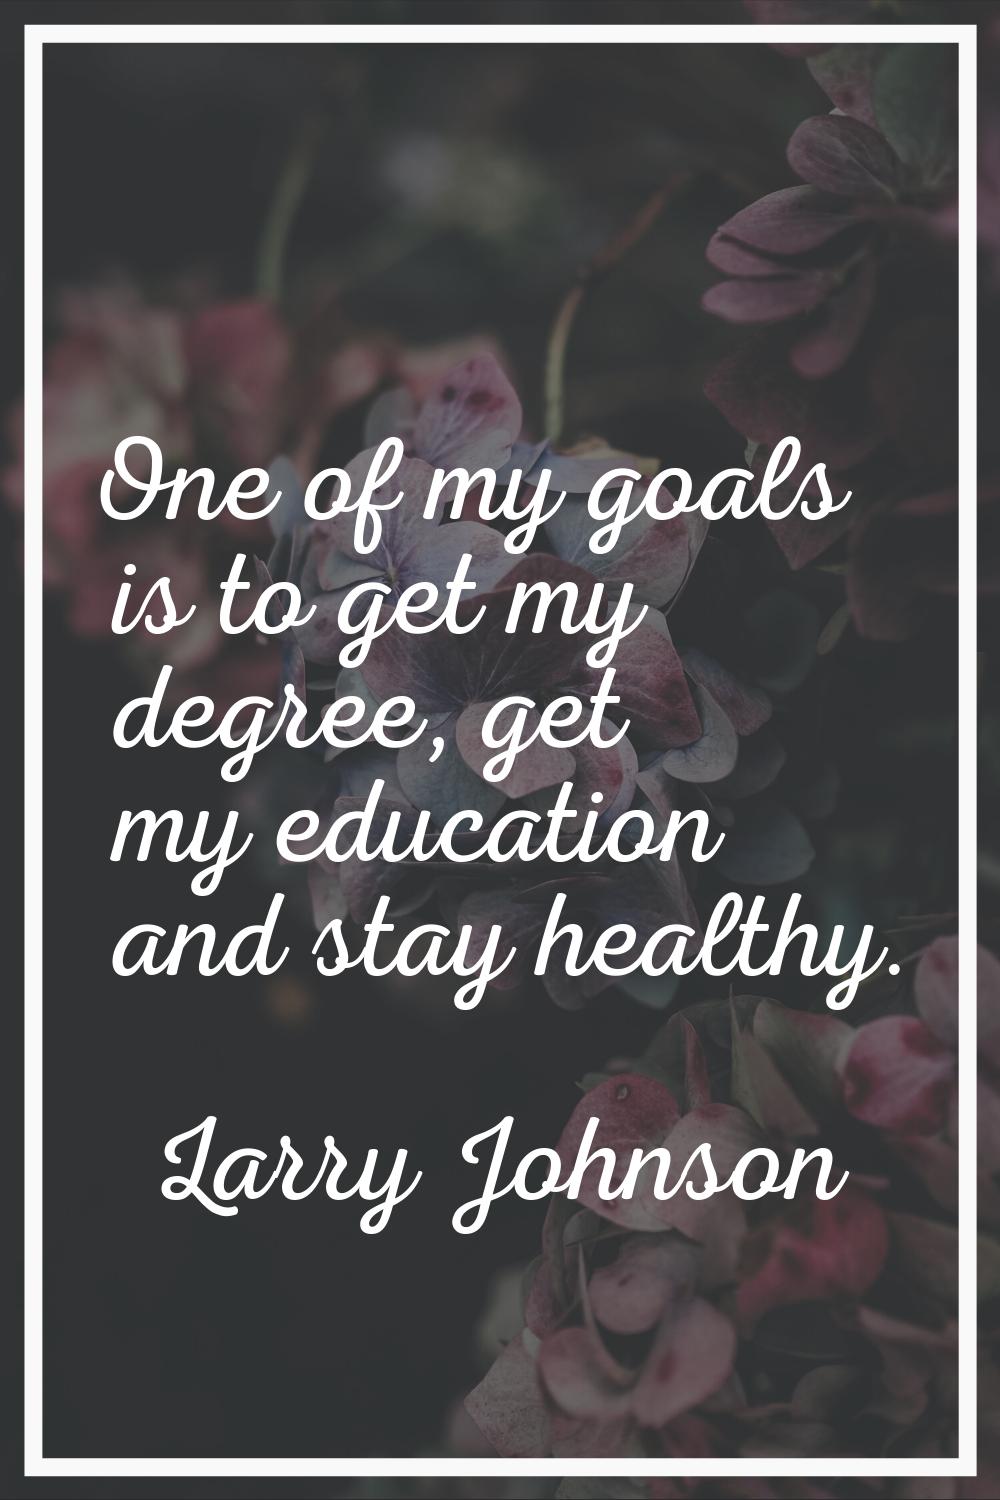 One of my goals is to get my degree, get my education and stay healthy.